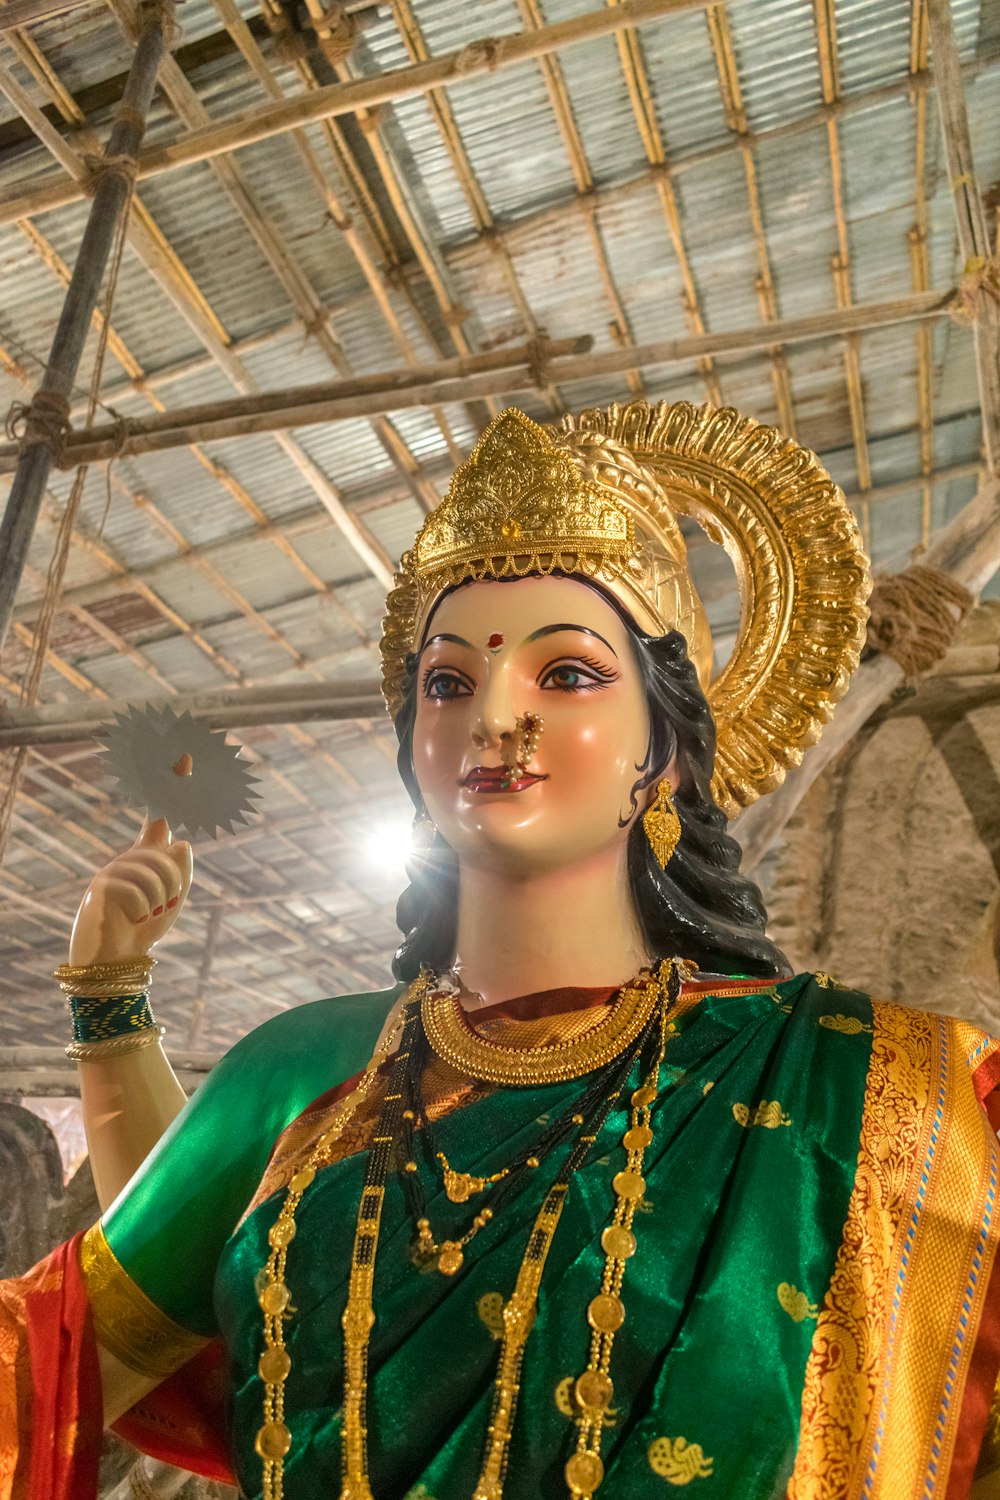 a statue of a woman in a green and gold outfit